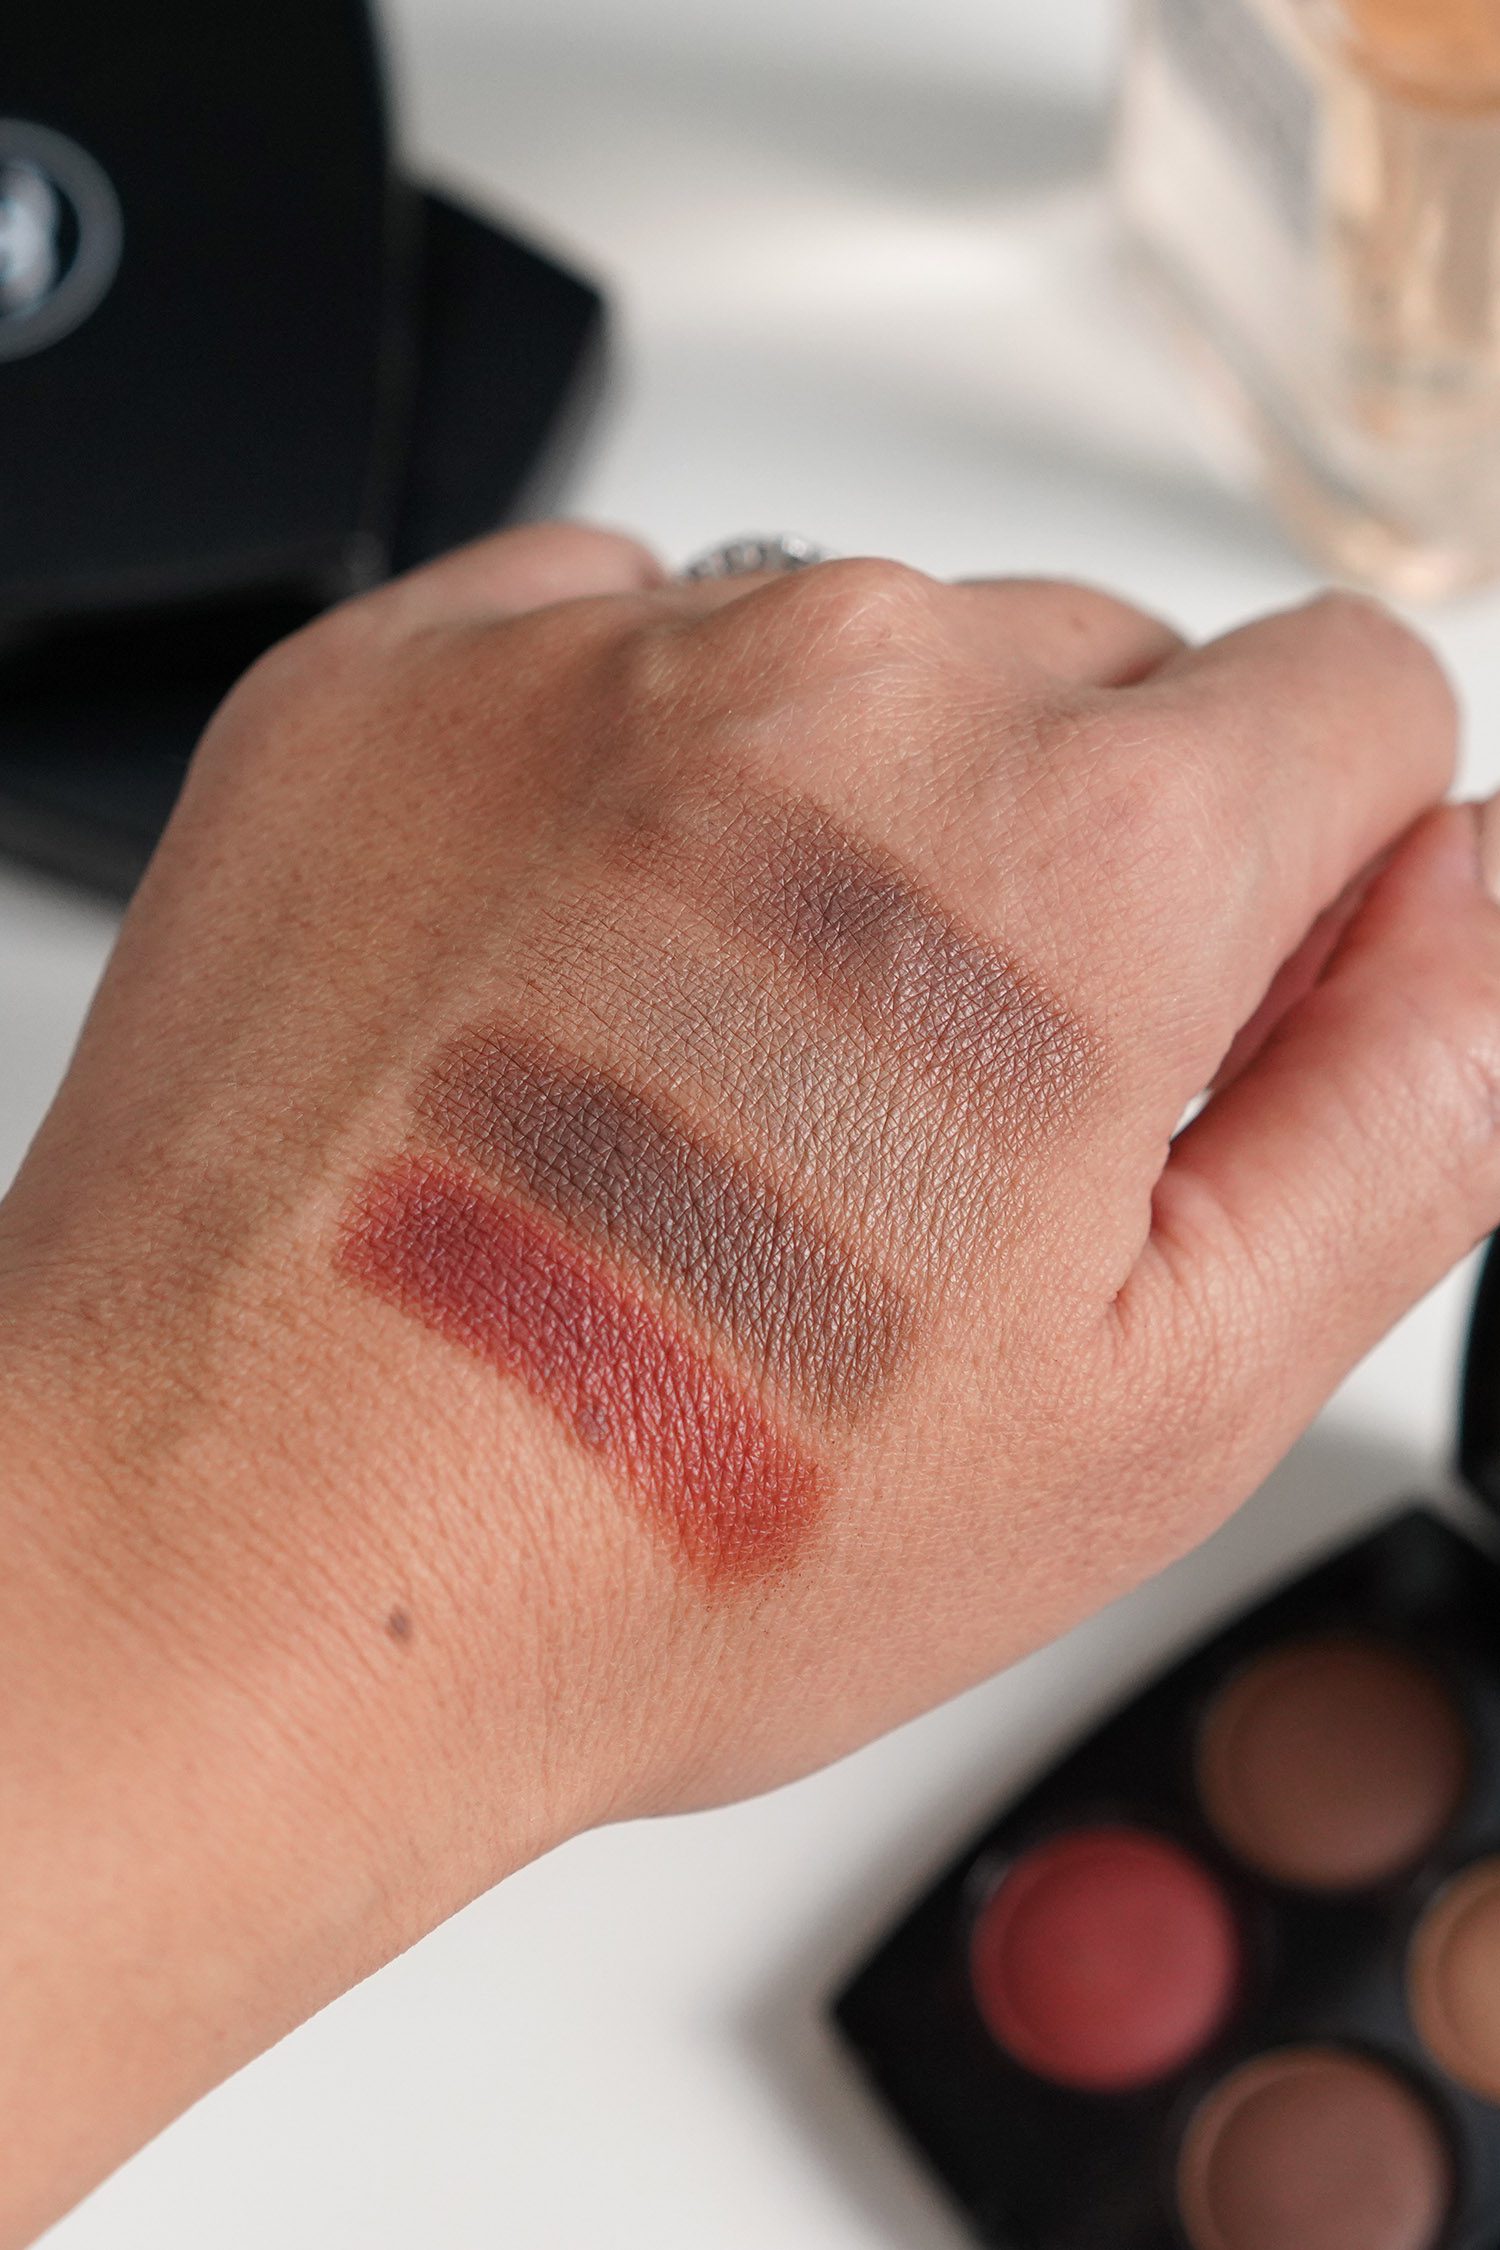 Chanel Les 4 Ombres #234 Poésie from États Poétiques Collection for Fall  2014, Review, Swatches & FOTD